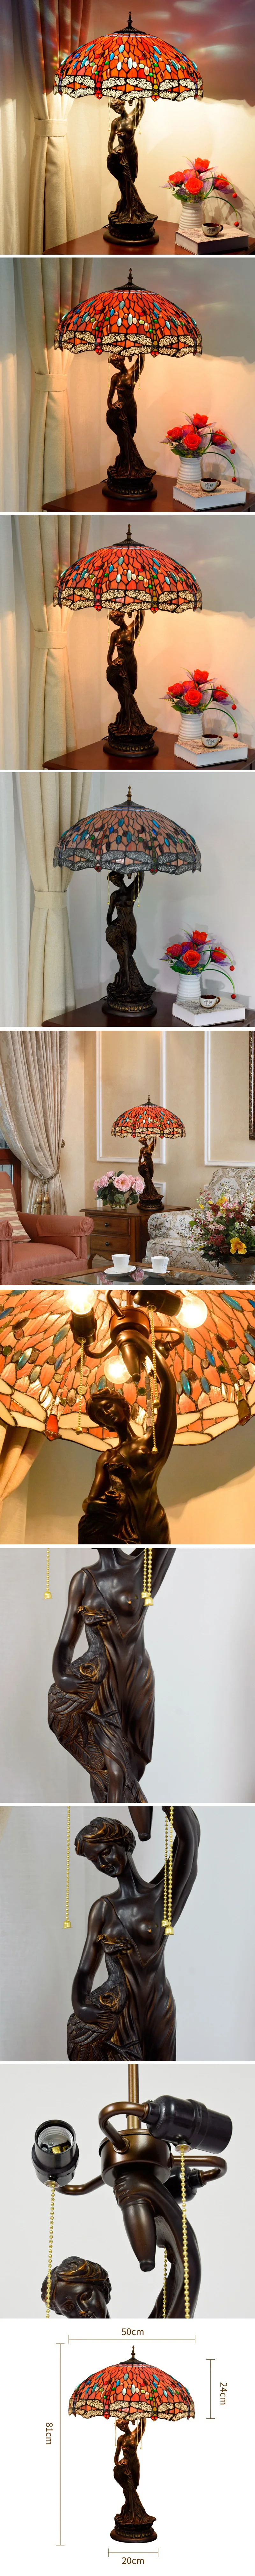 Tiffany table lamp High quality antique stained glass tiffany table lamp bed room classic LED lamps